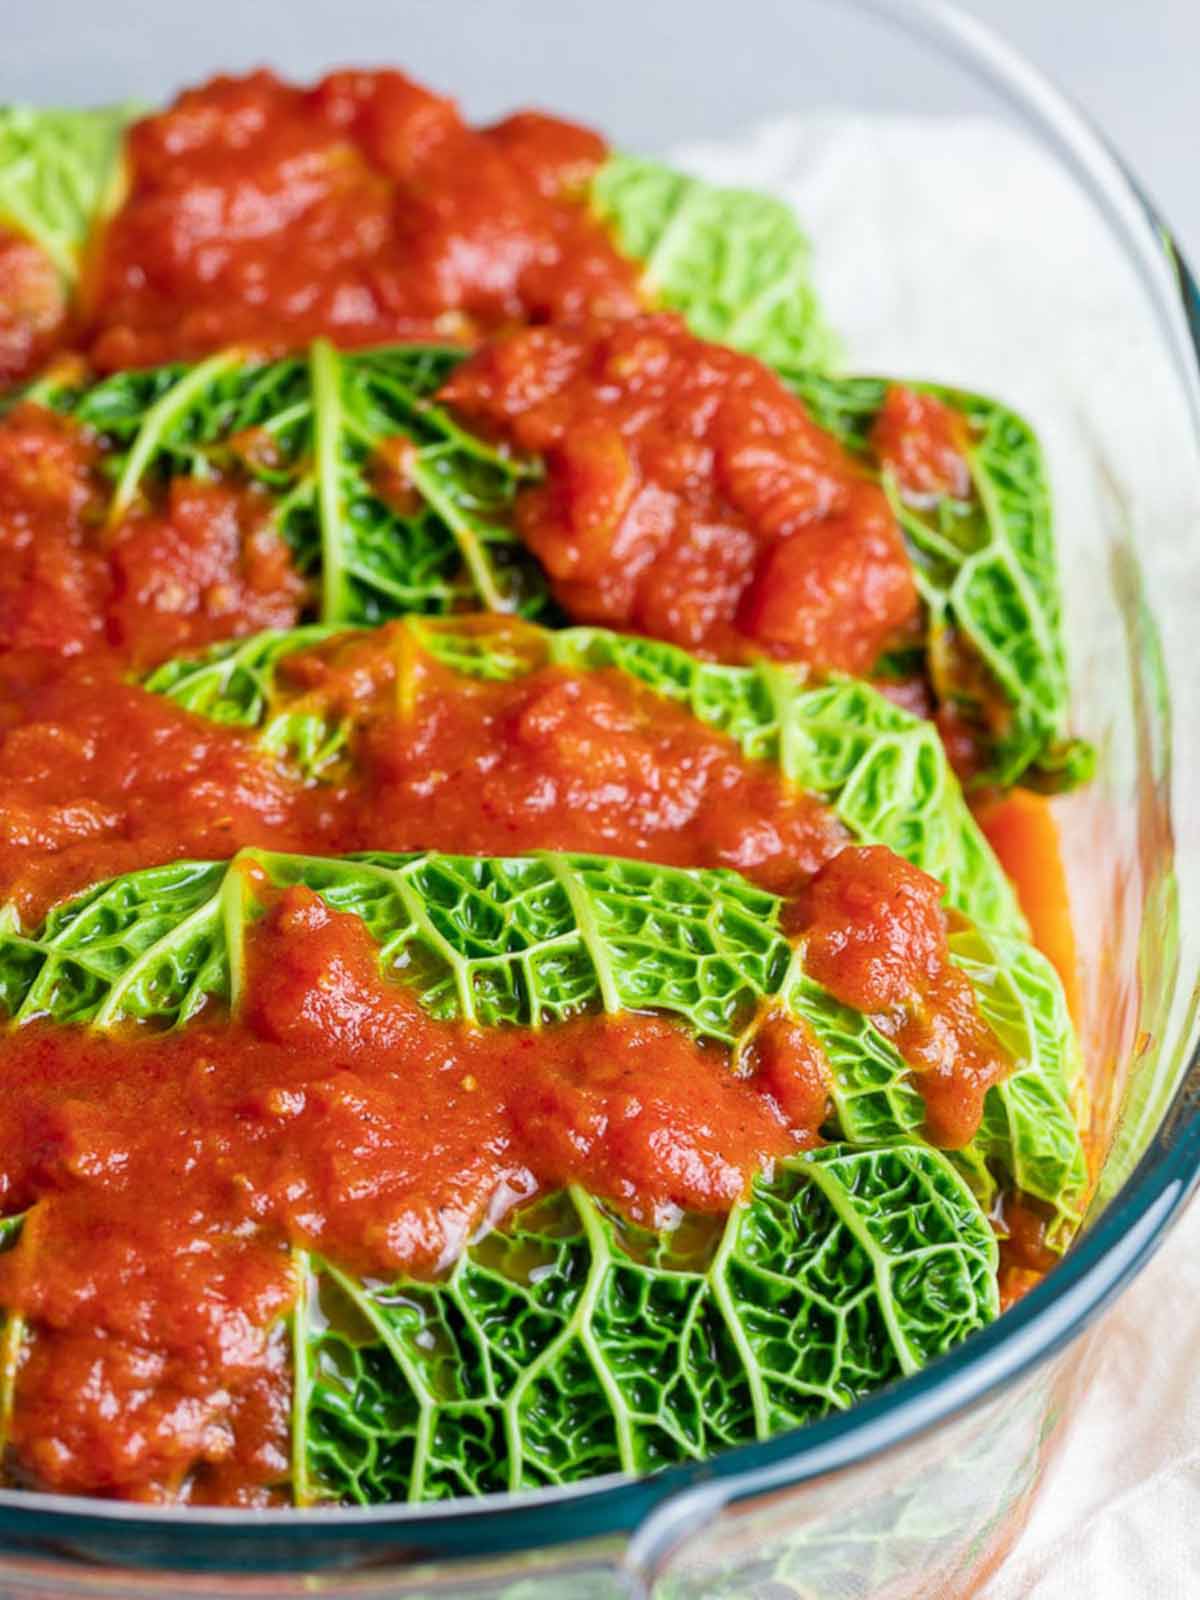 cabbage rolls in a bowl with red sauce